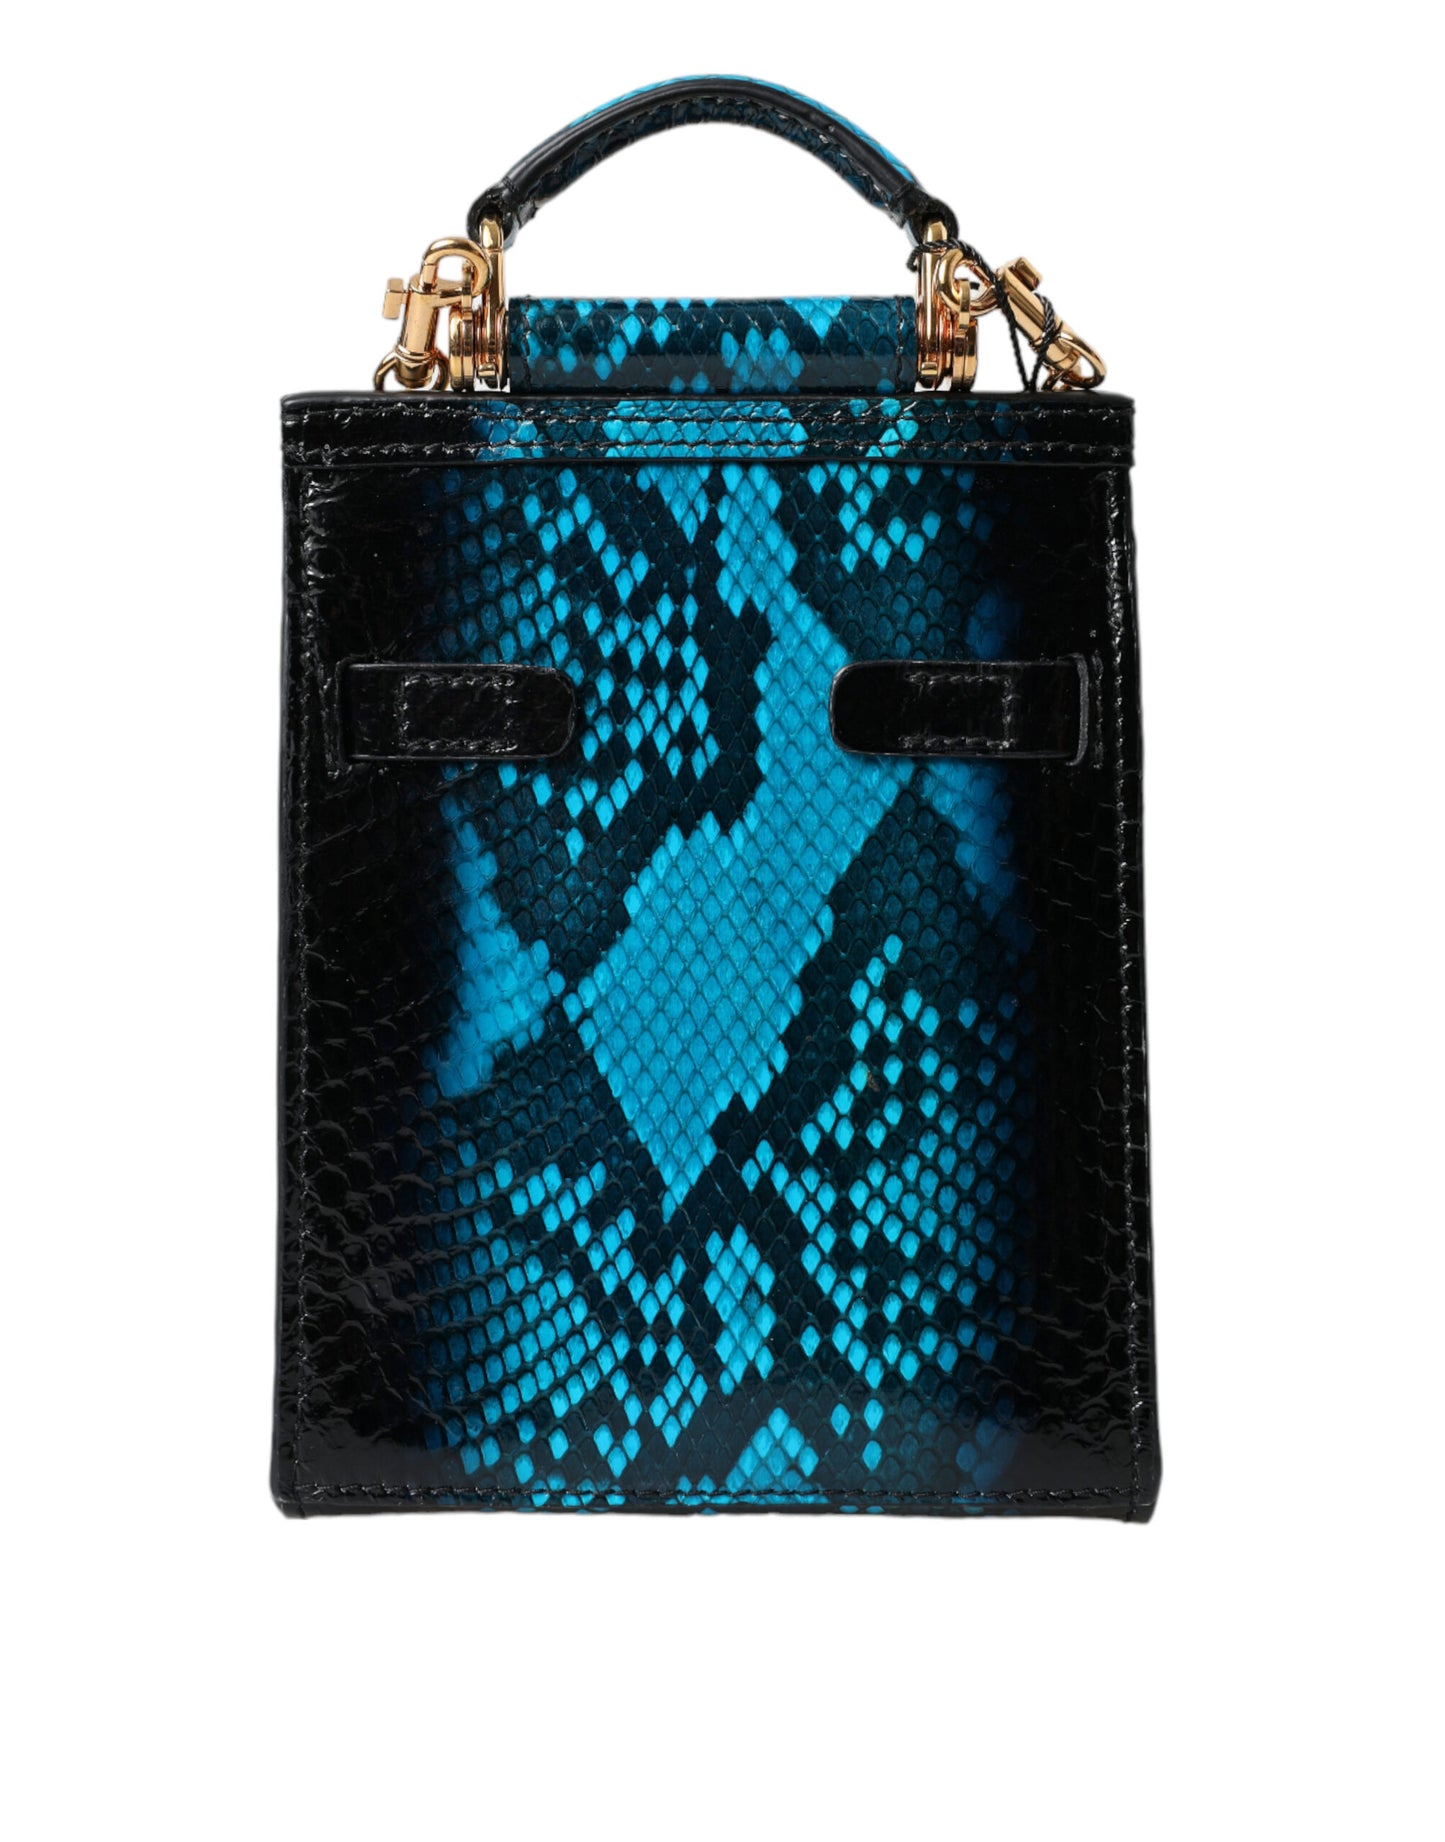 Exotic Leather Blue Crossbody Bag with Gold Accents